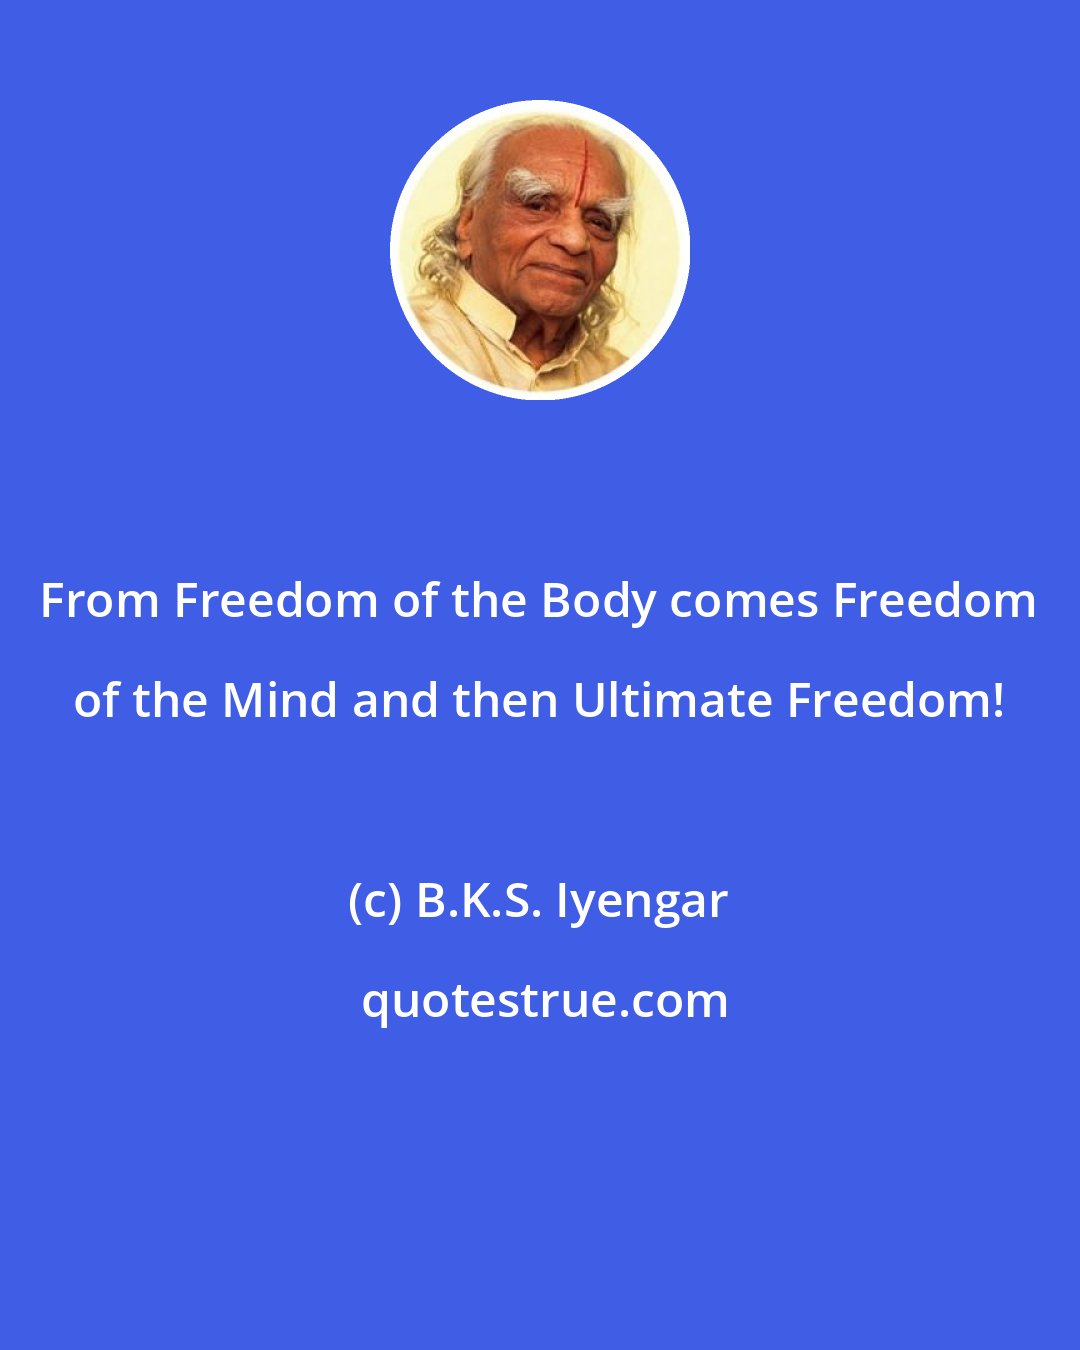 B.K.S. Iyengar: From Freedom of the Body comes Freedom of the Mind and then Ultimate Freedom!